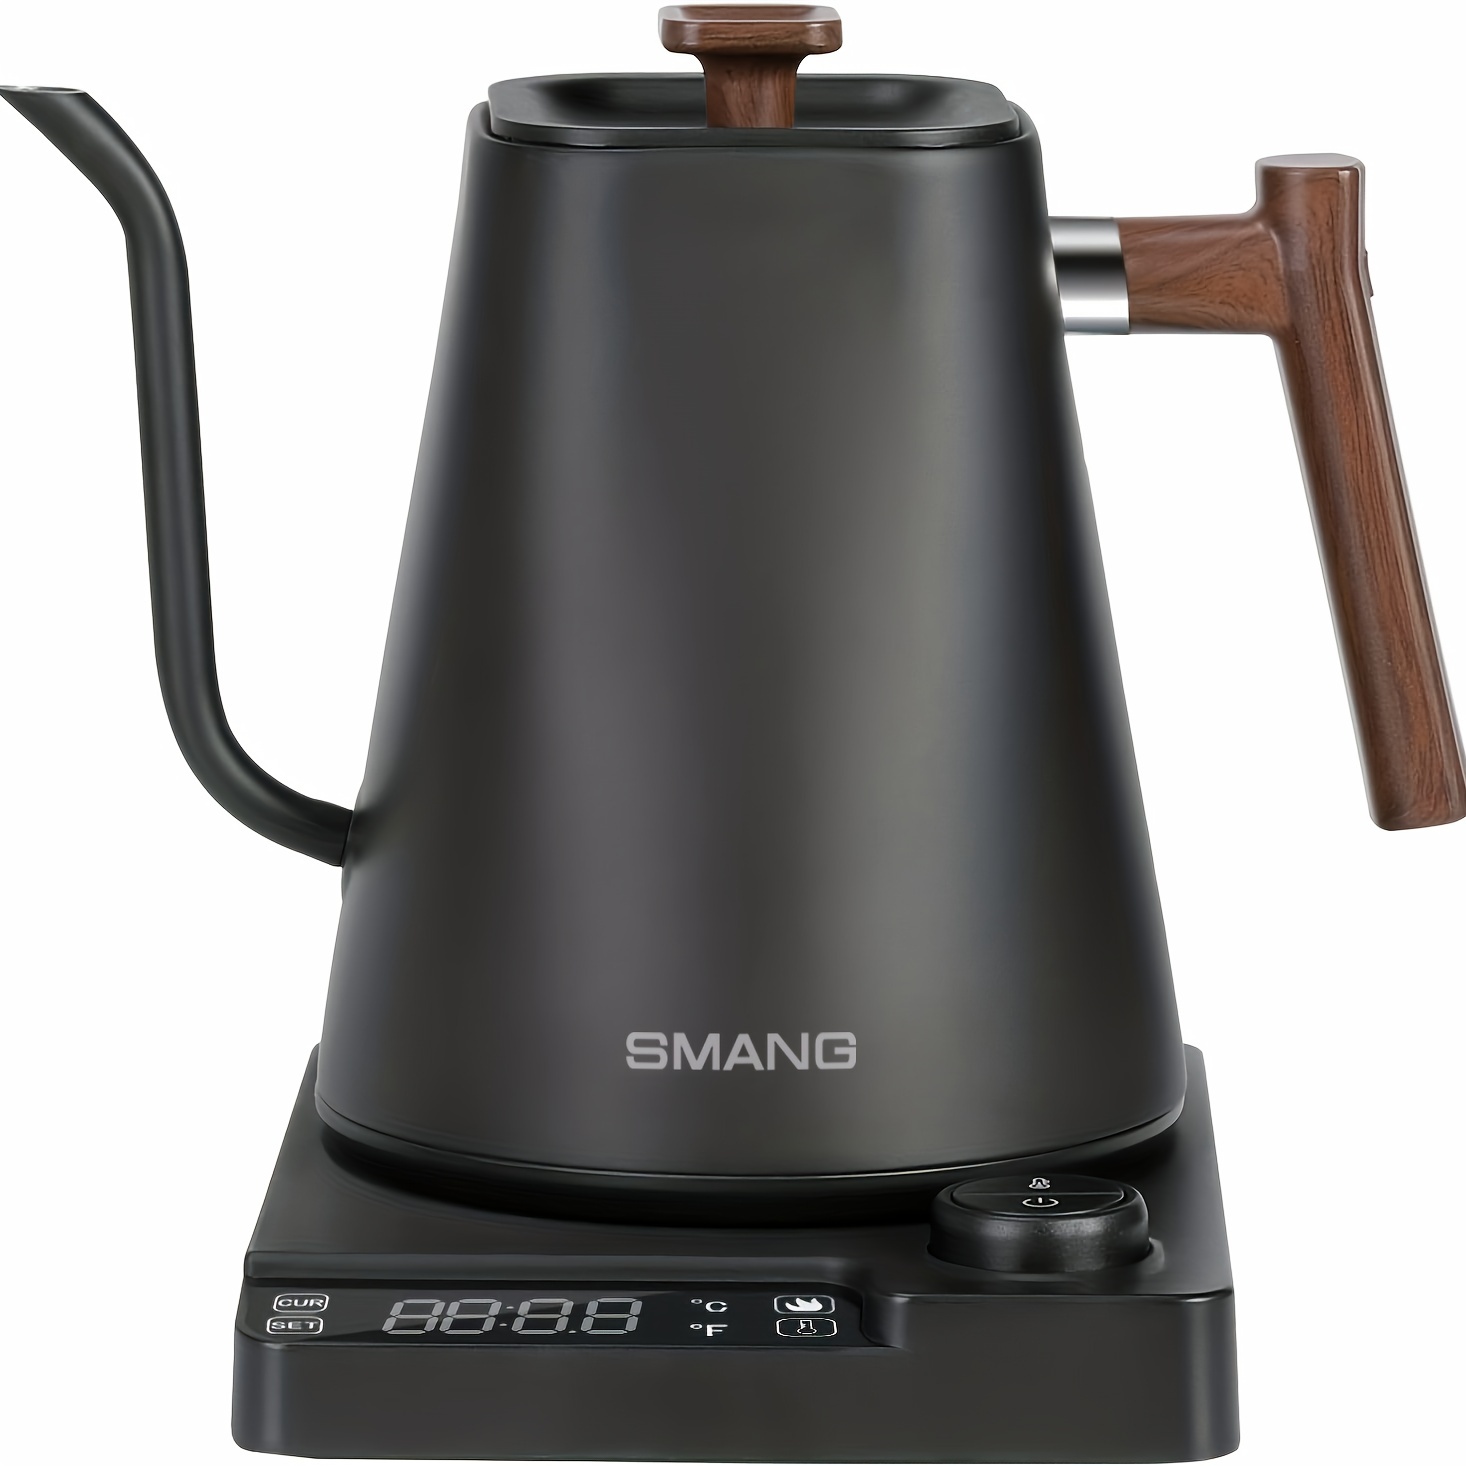 304 Stainless Steel Electric Kettle with Intelligent Frequency Conversion  and Constant Temperature Control - Perfect for Hand Brewing Coffee and Boili